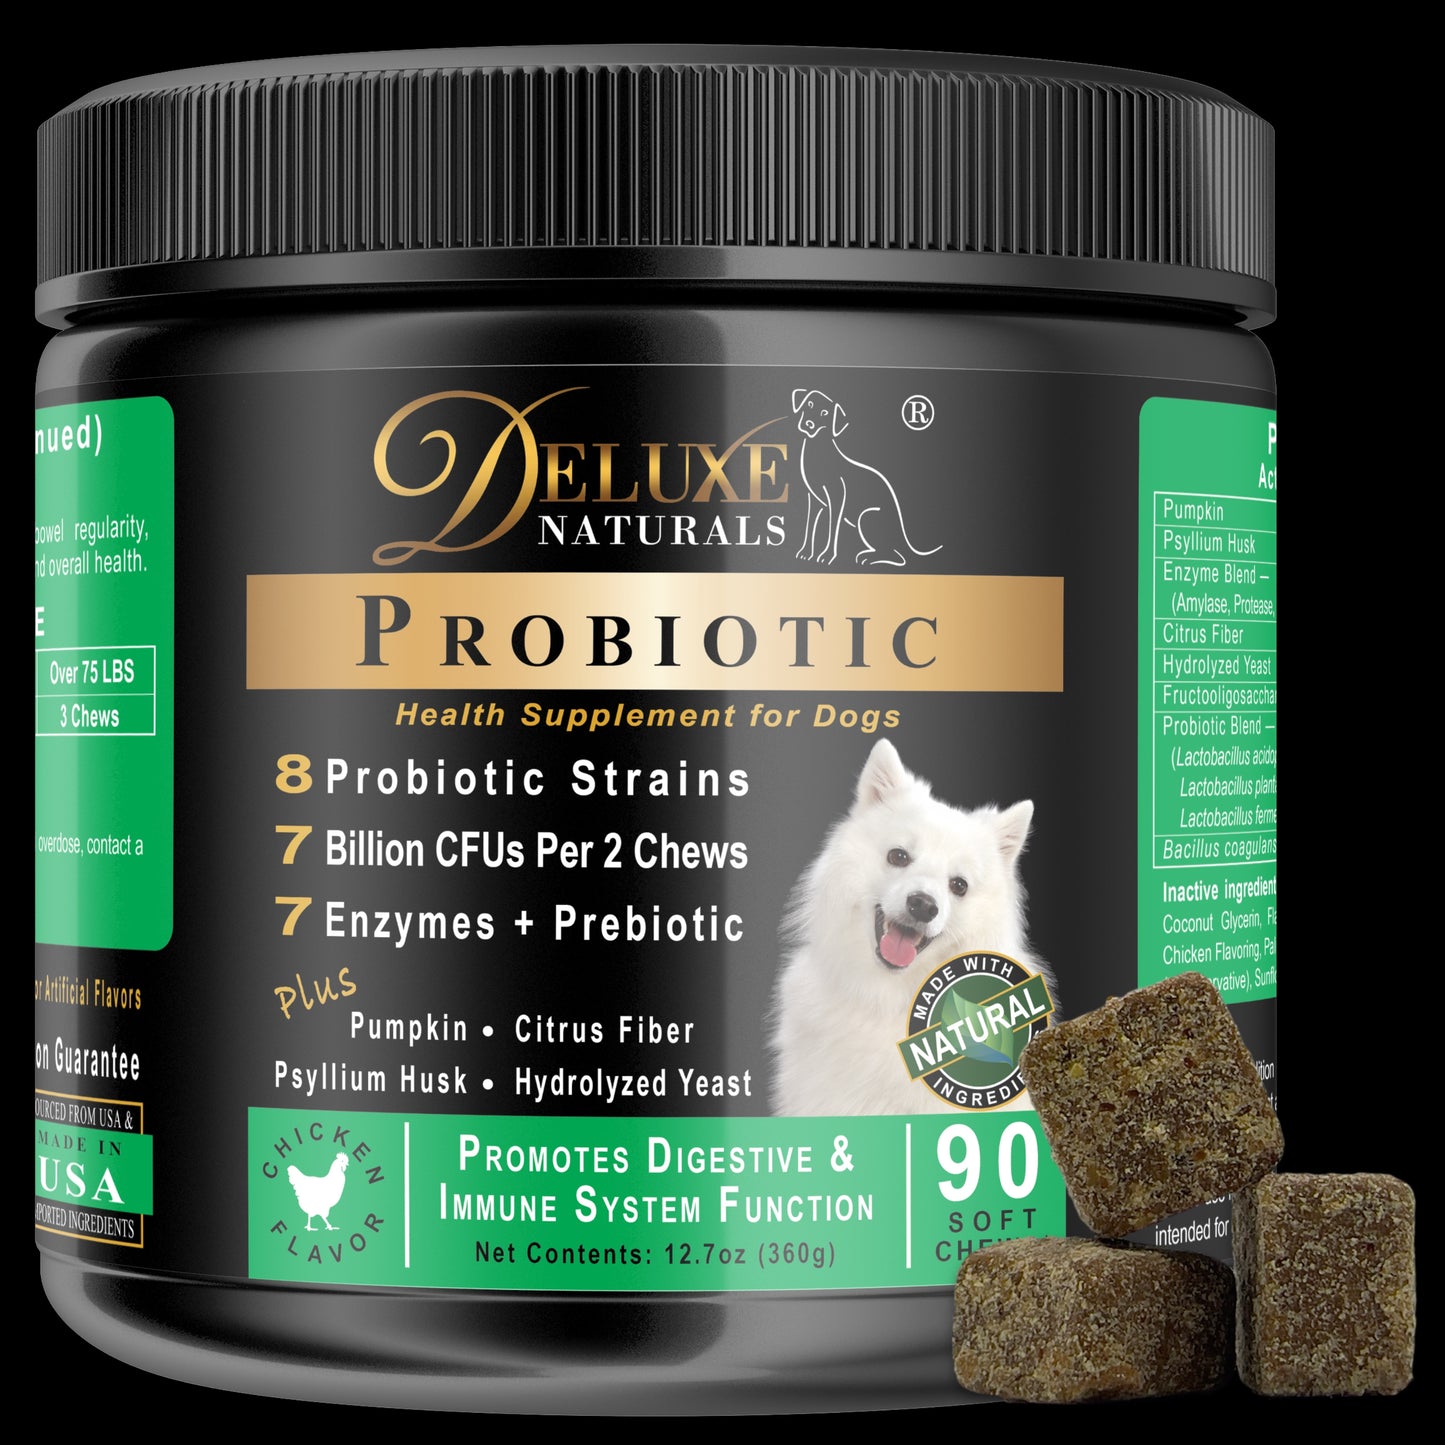 Deluxe Naturals Probiotic Soft Chews for Dogs - 90 Count (Pack of 1)